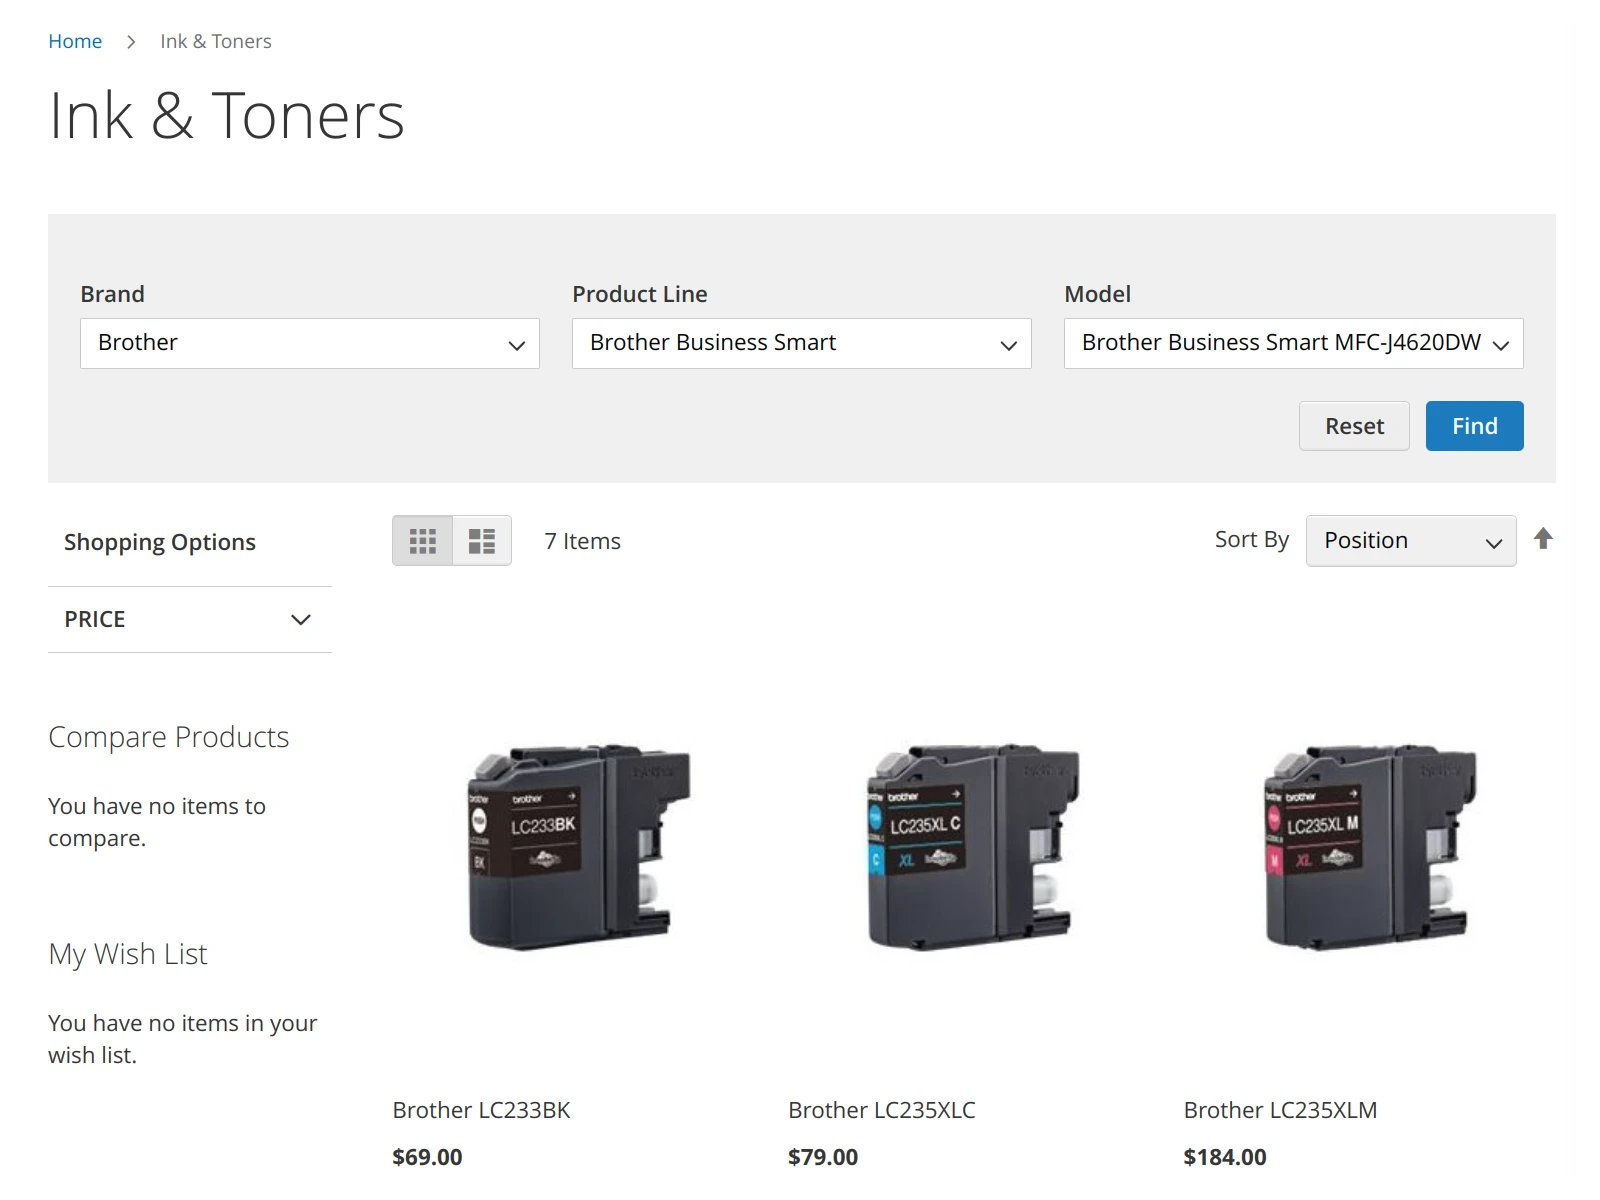 Printer cartridges filtered with Magento 2 Product Finder module